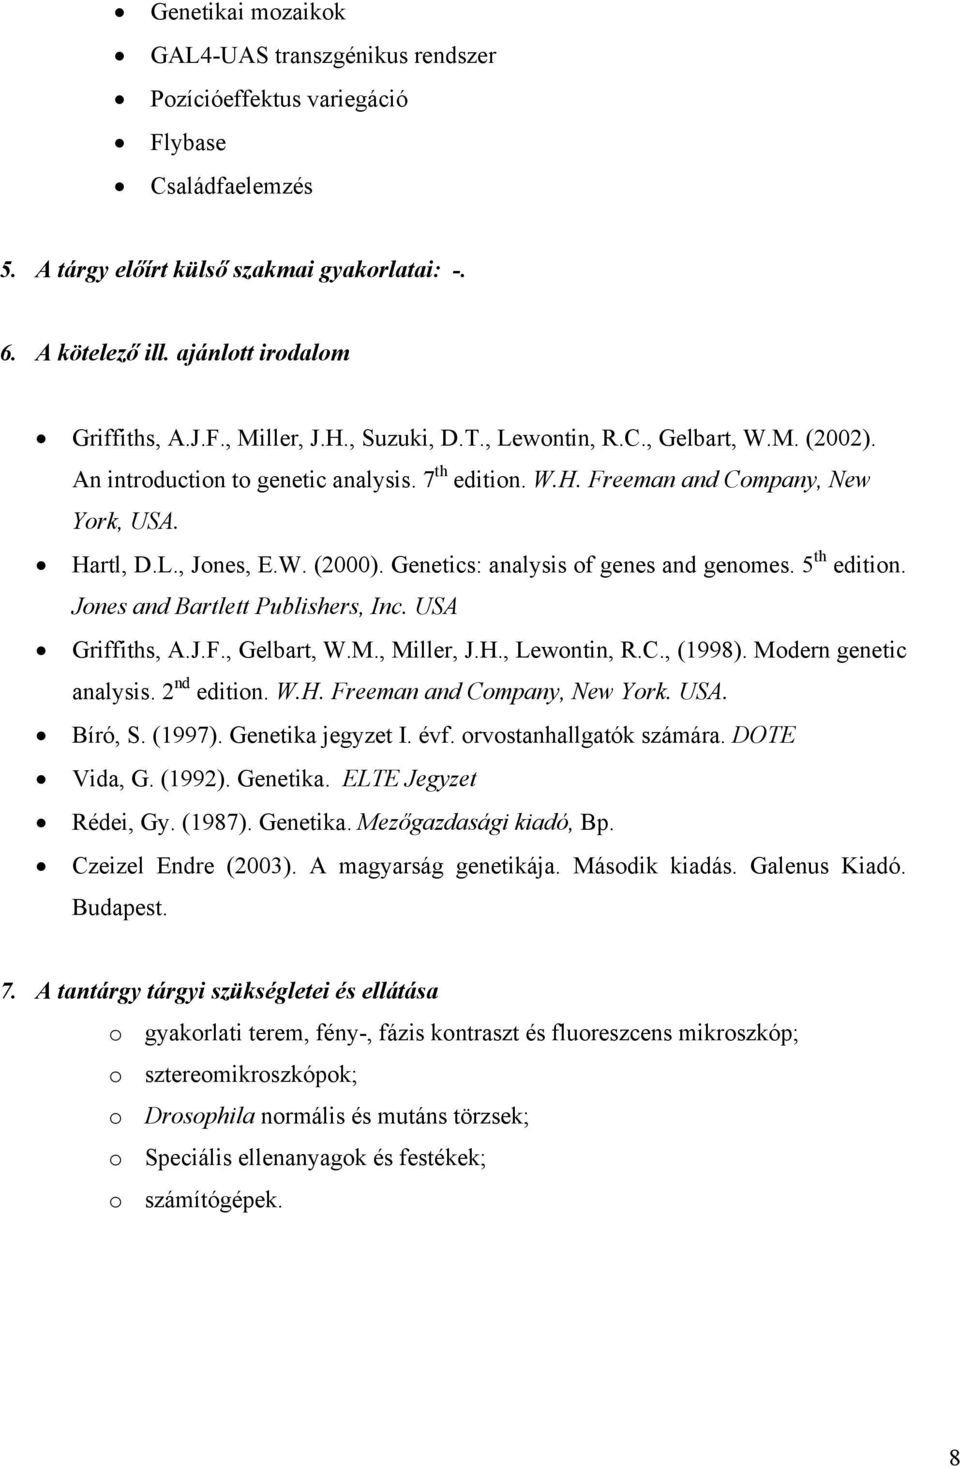 Genetics: analysis of genes and genomes. 5 th edition. Jones and Bartlett Publishers, Inc. USA Griffiths, A.J.F., Gelbart, W.M., Miller, J.H., Lewontin, R.C., (1998). Modern genetic analysis.